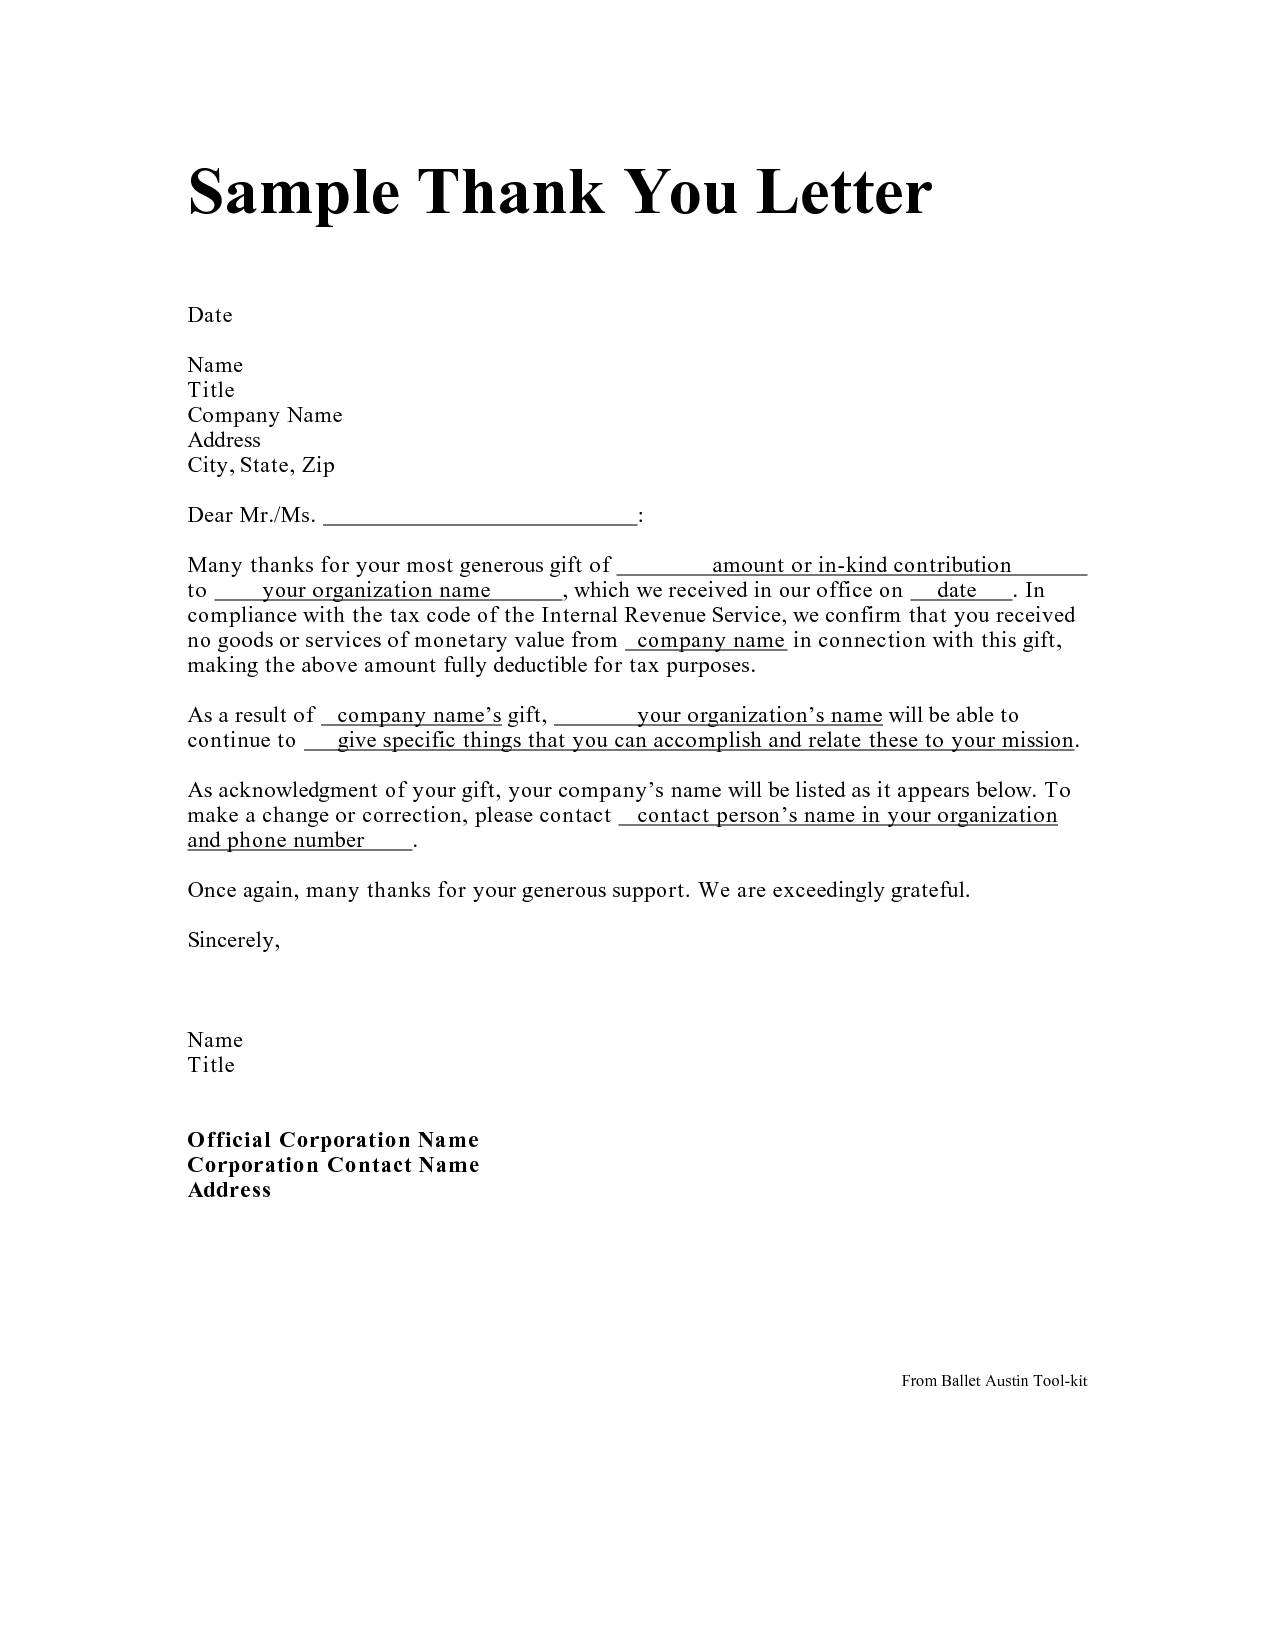 donation thank you letter template example-Personal Thank You Letter Personal Thank You Letter Samples Writing Thank You Notes Thank You Note Examples 5-p